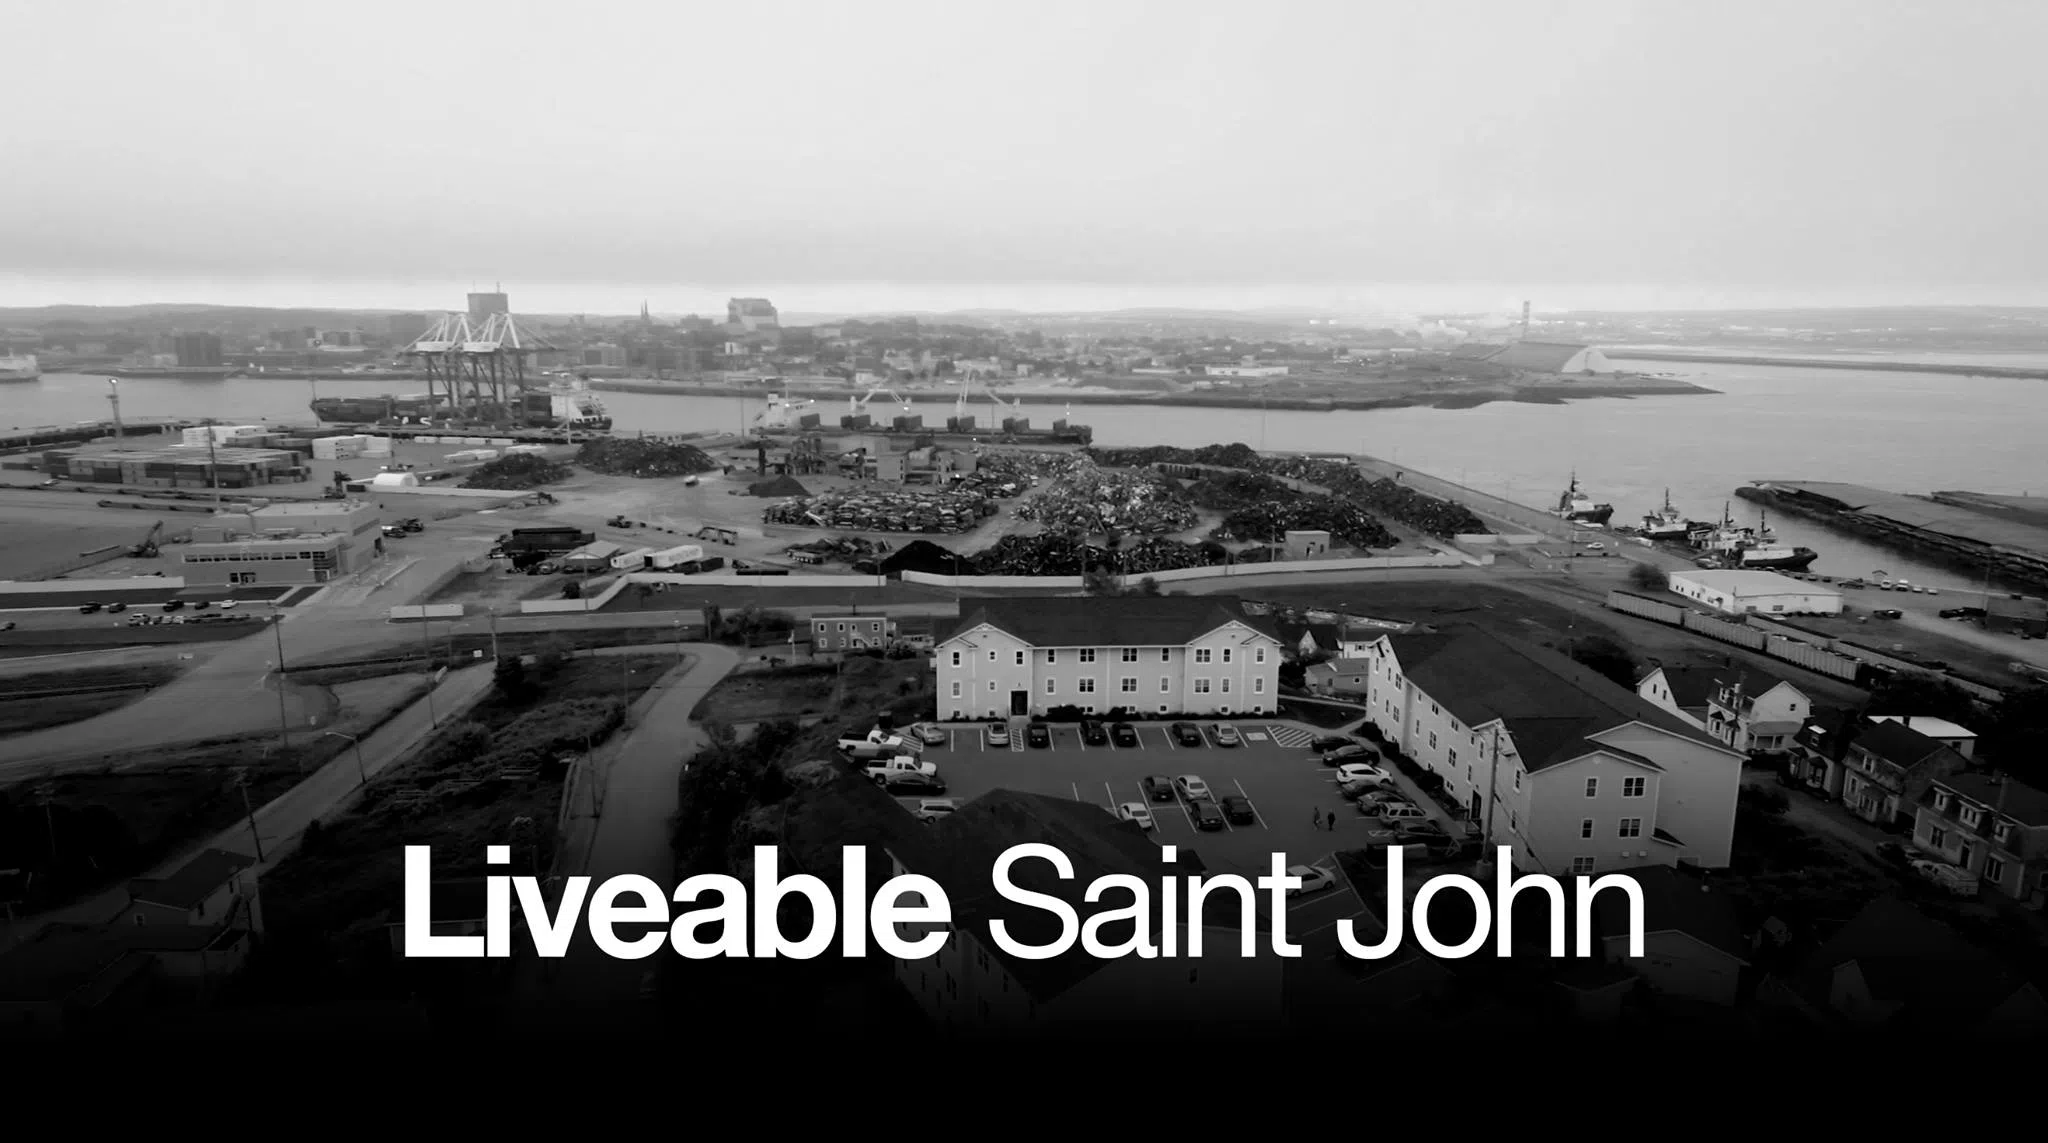 Liveable Saint John Wants A 90 Day Monitoring Period Of AIM